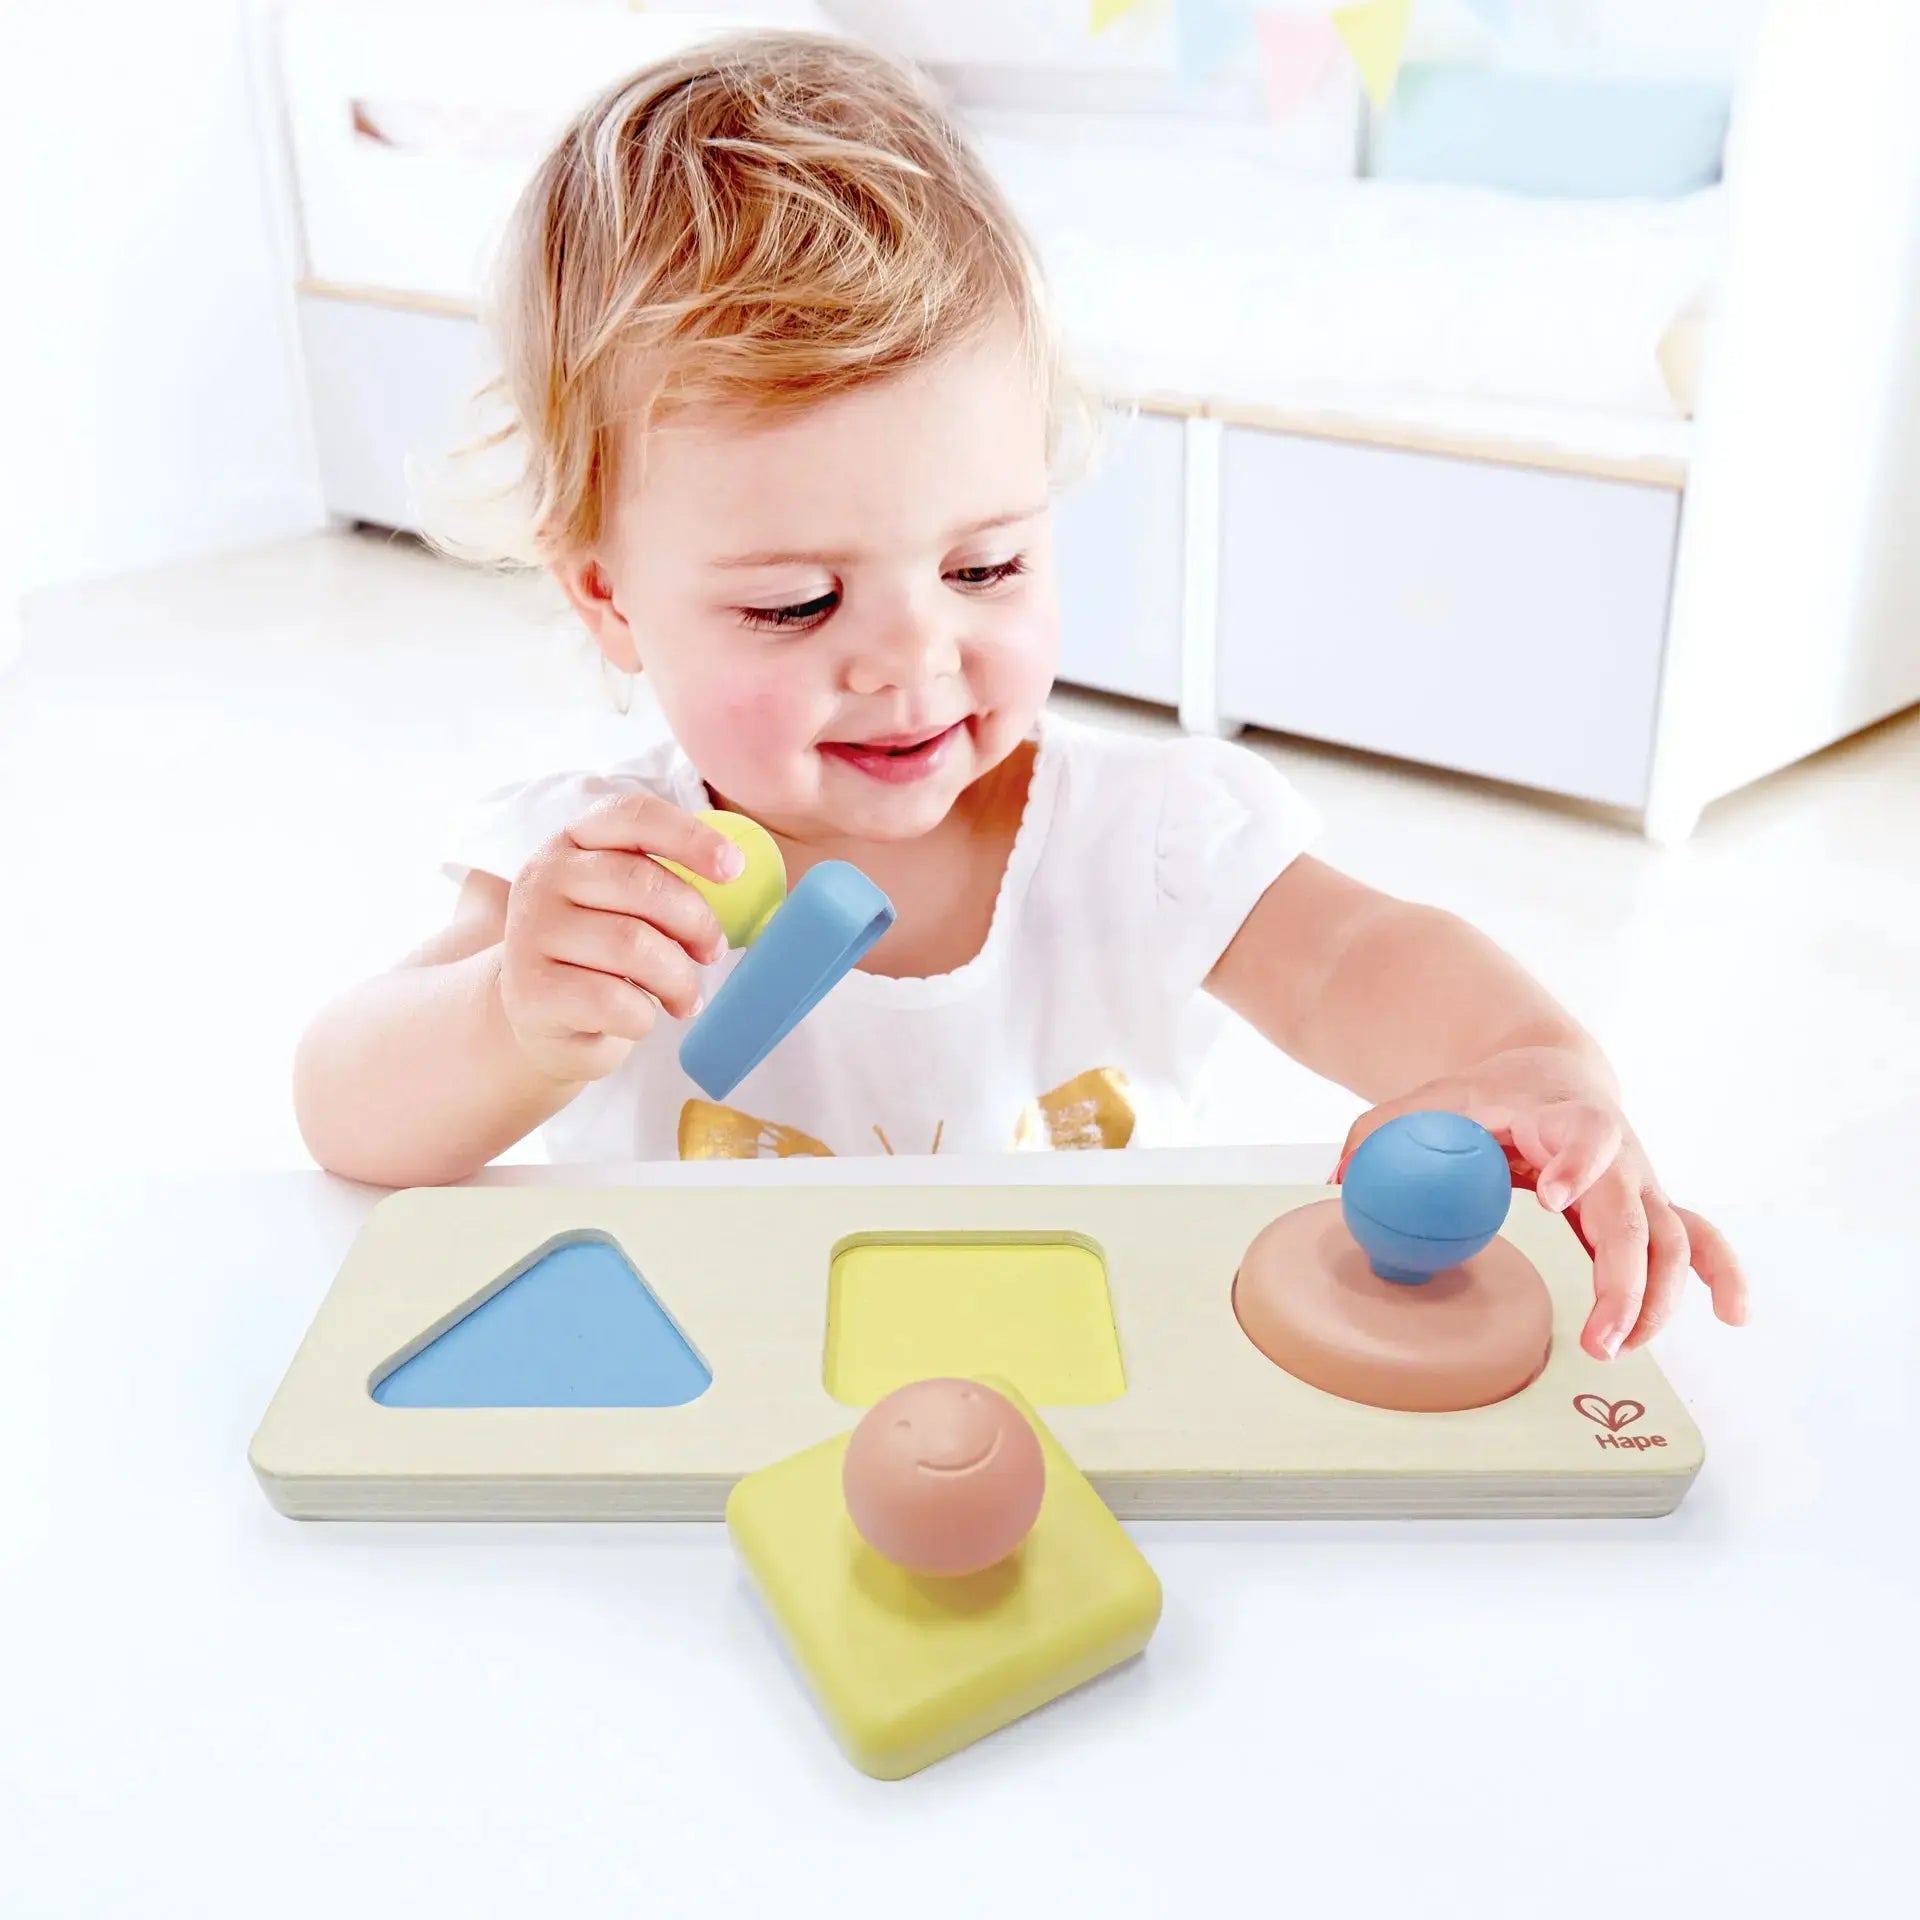 Baby Educational Toys Kids Development Games Wood Puzzles Sensory Toy  Montessori Wooden Toys For Babies Children